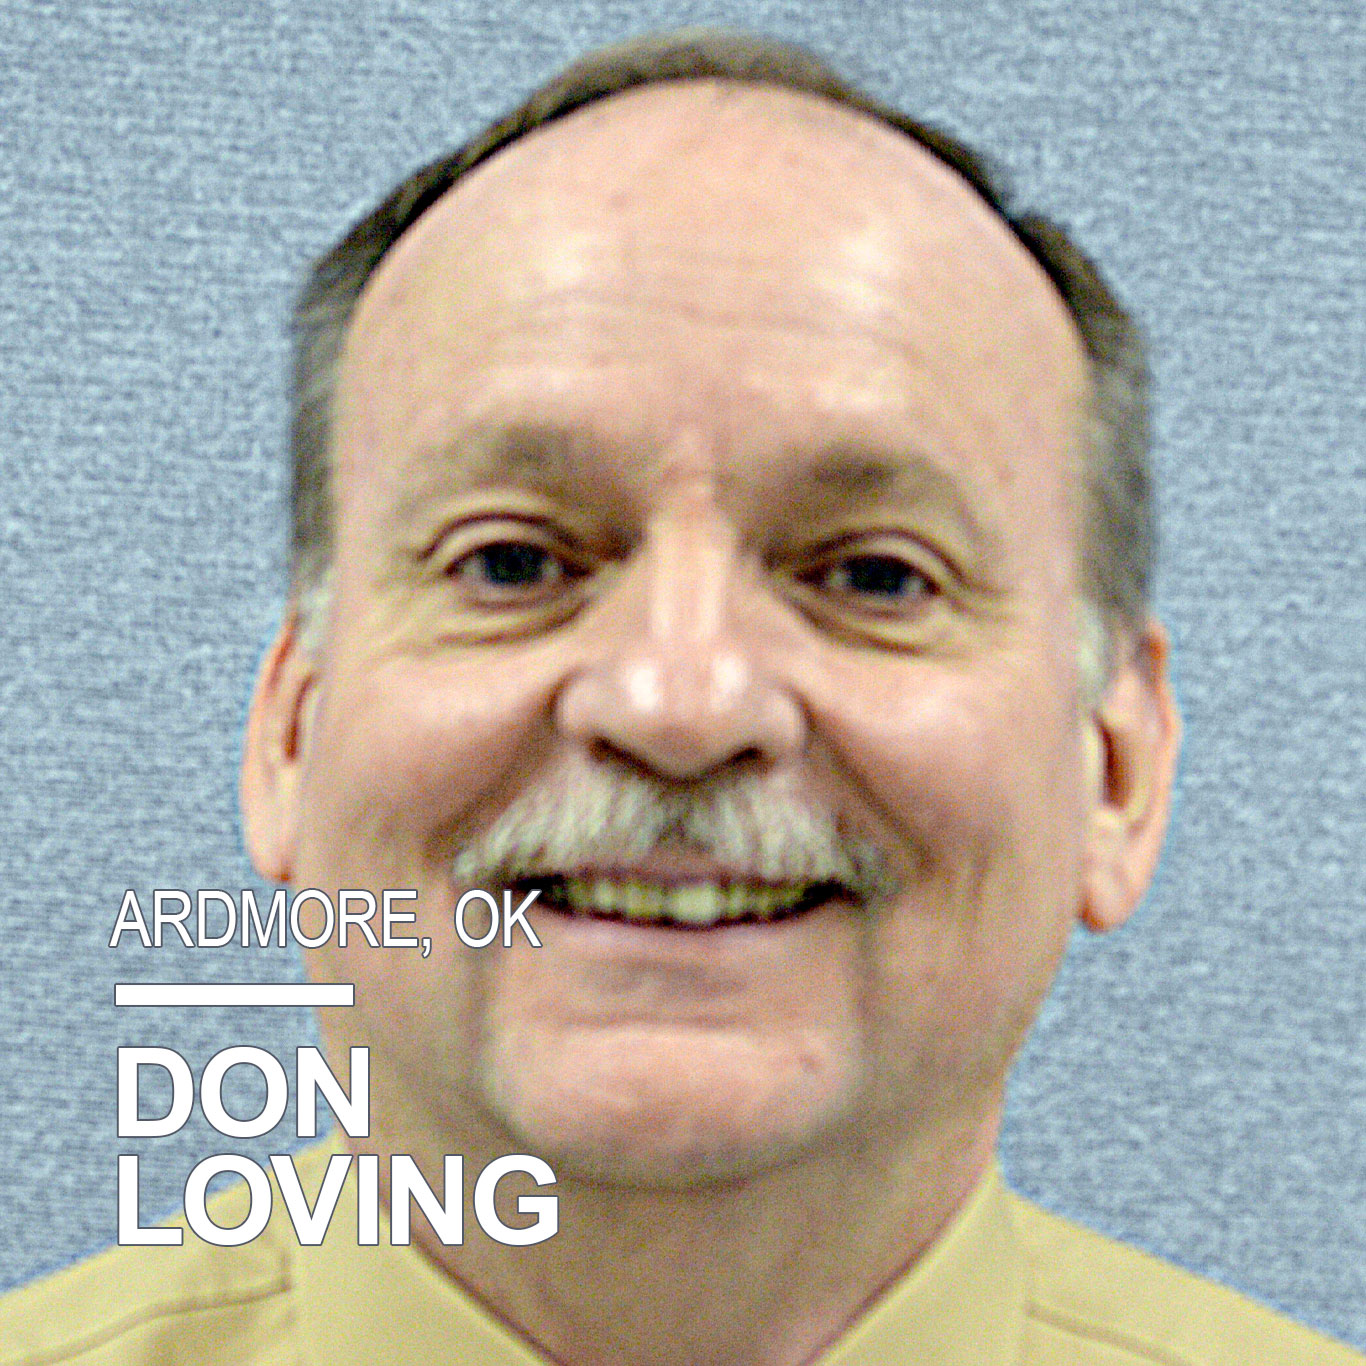 Don Loving is a professor of science at Murray State College in Ardmore, OK, where he teaches human anatomy for nursing majors and Earth science for elementary education majors. He’s also faculty advisor for the student Native American organization. He has a bachelor of science in Science Education, a master’s in Natural Science, and a STEM teaching certificate. Don loves seeing disengaged students become successful through engaging science curriculum and activities. His passions include wildlife and conservation, Earth and space science, and amateur radio.